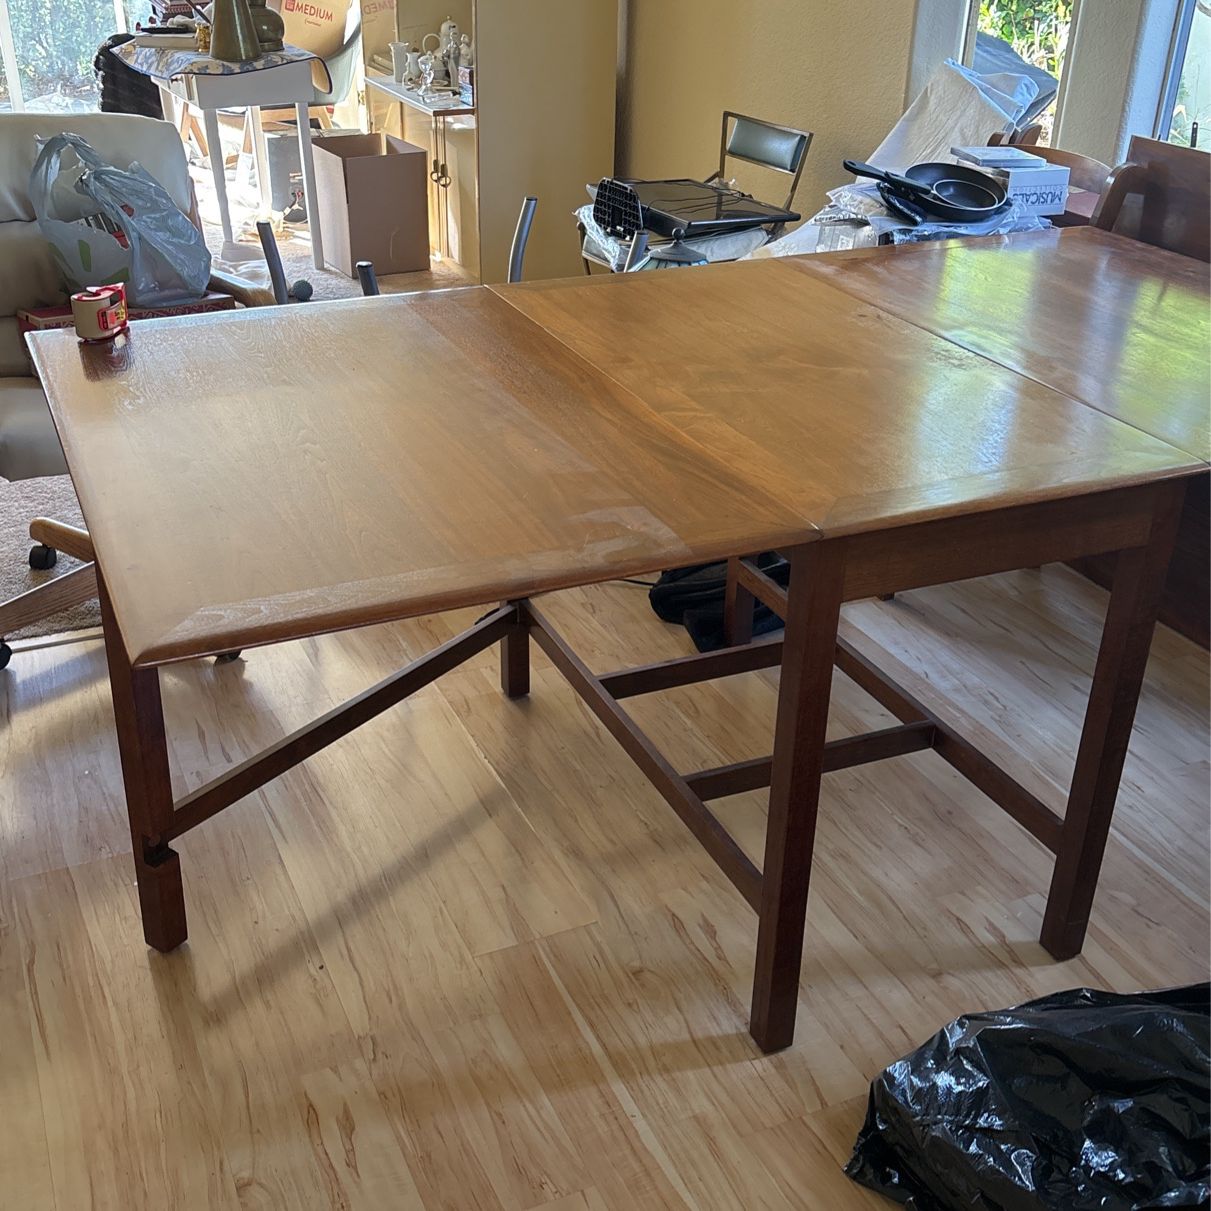 Mid Century Dining Table $250 Or Best Offer